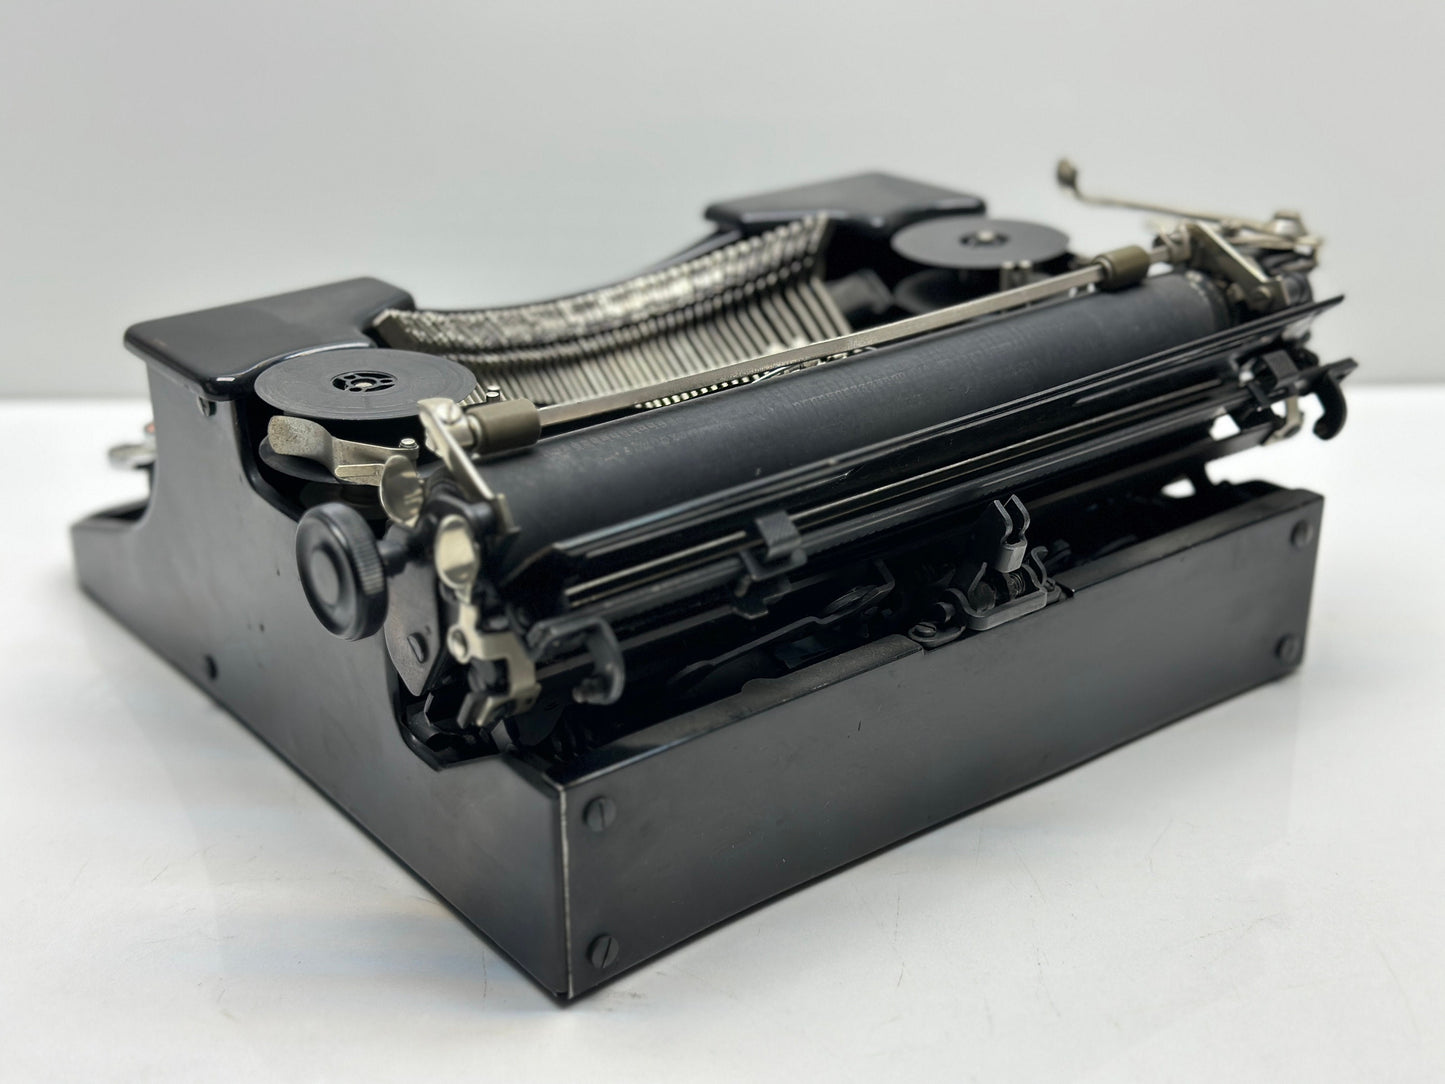 Fully Functional 1960 Model Black Triumph Typewriter - Classic and Functional